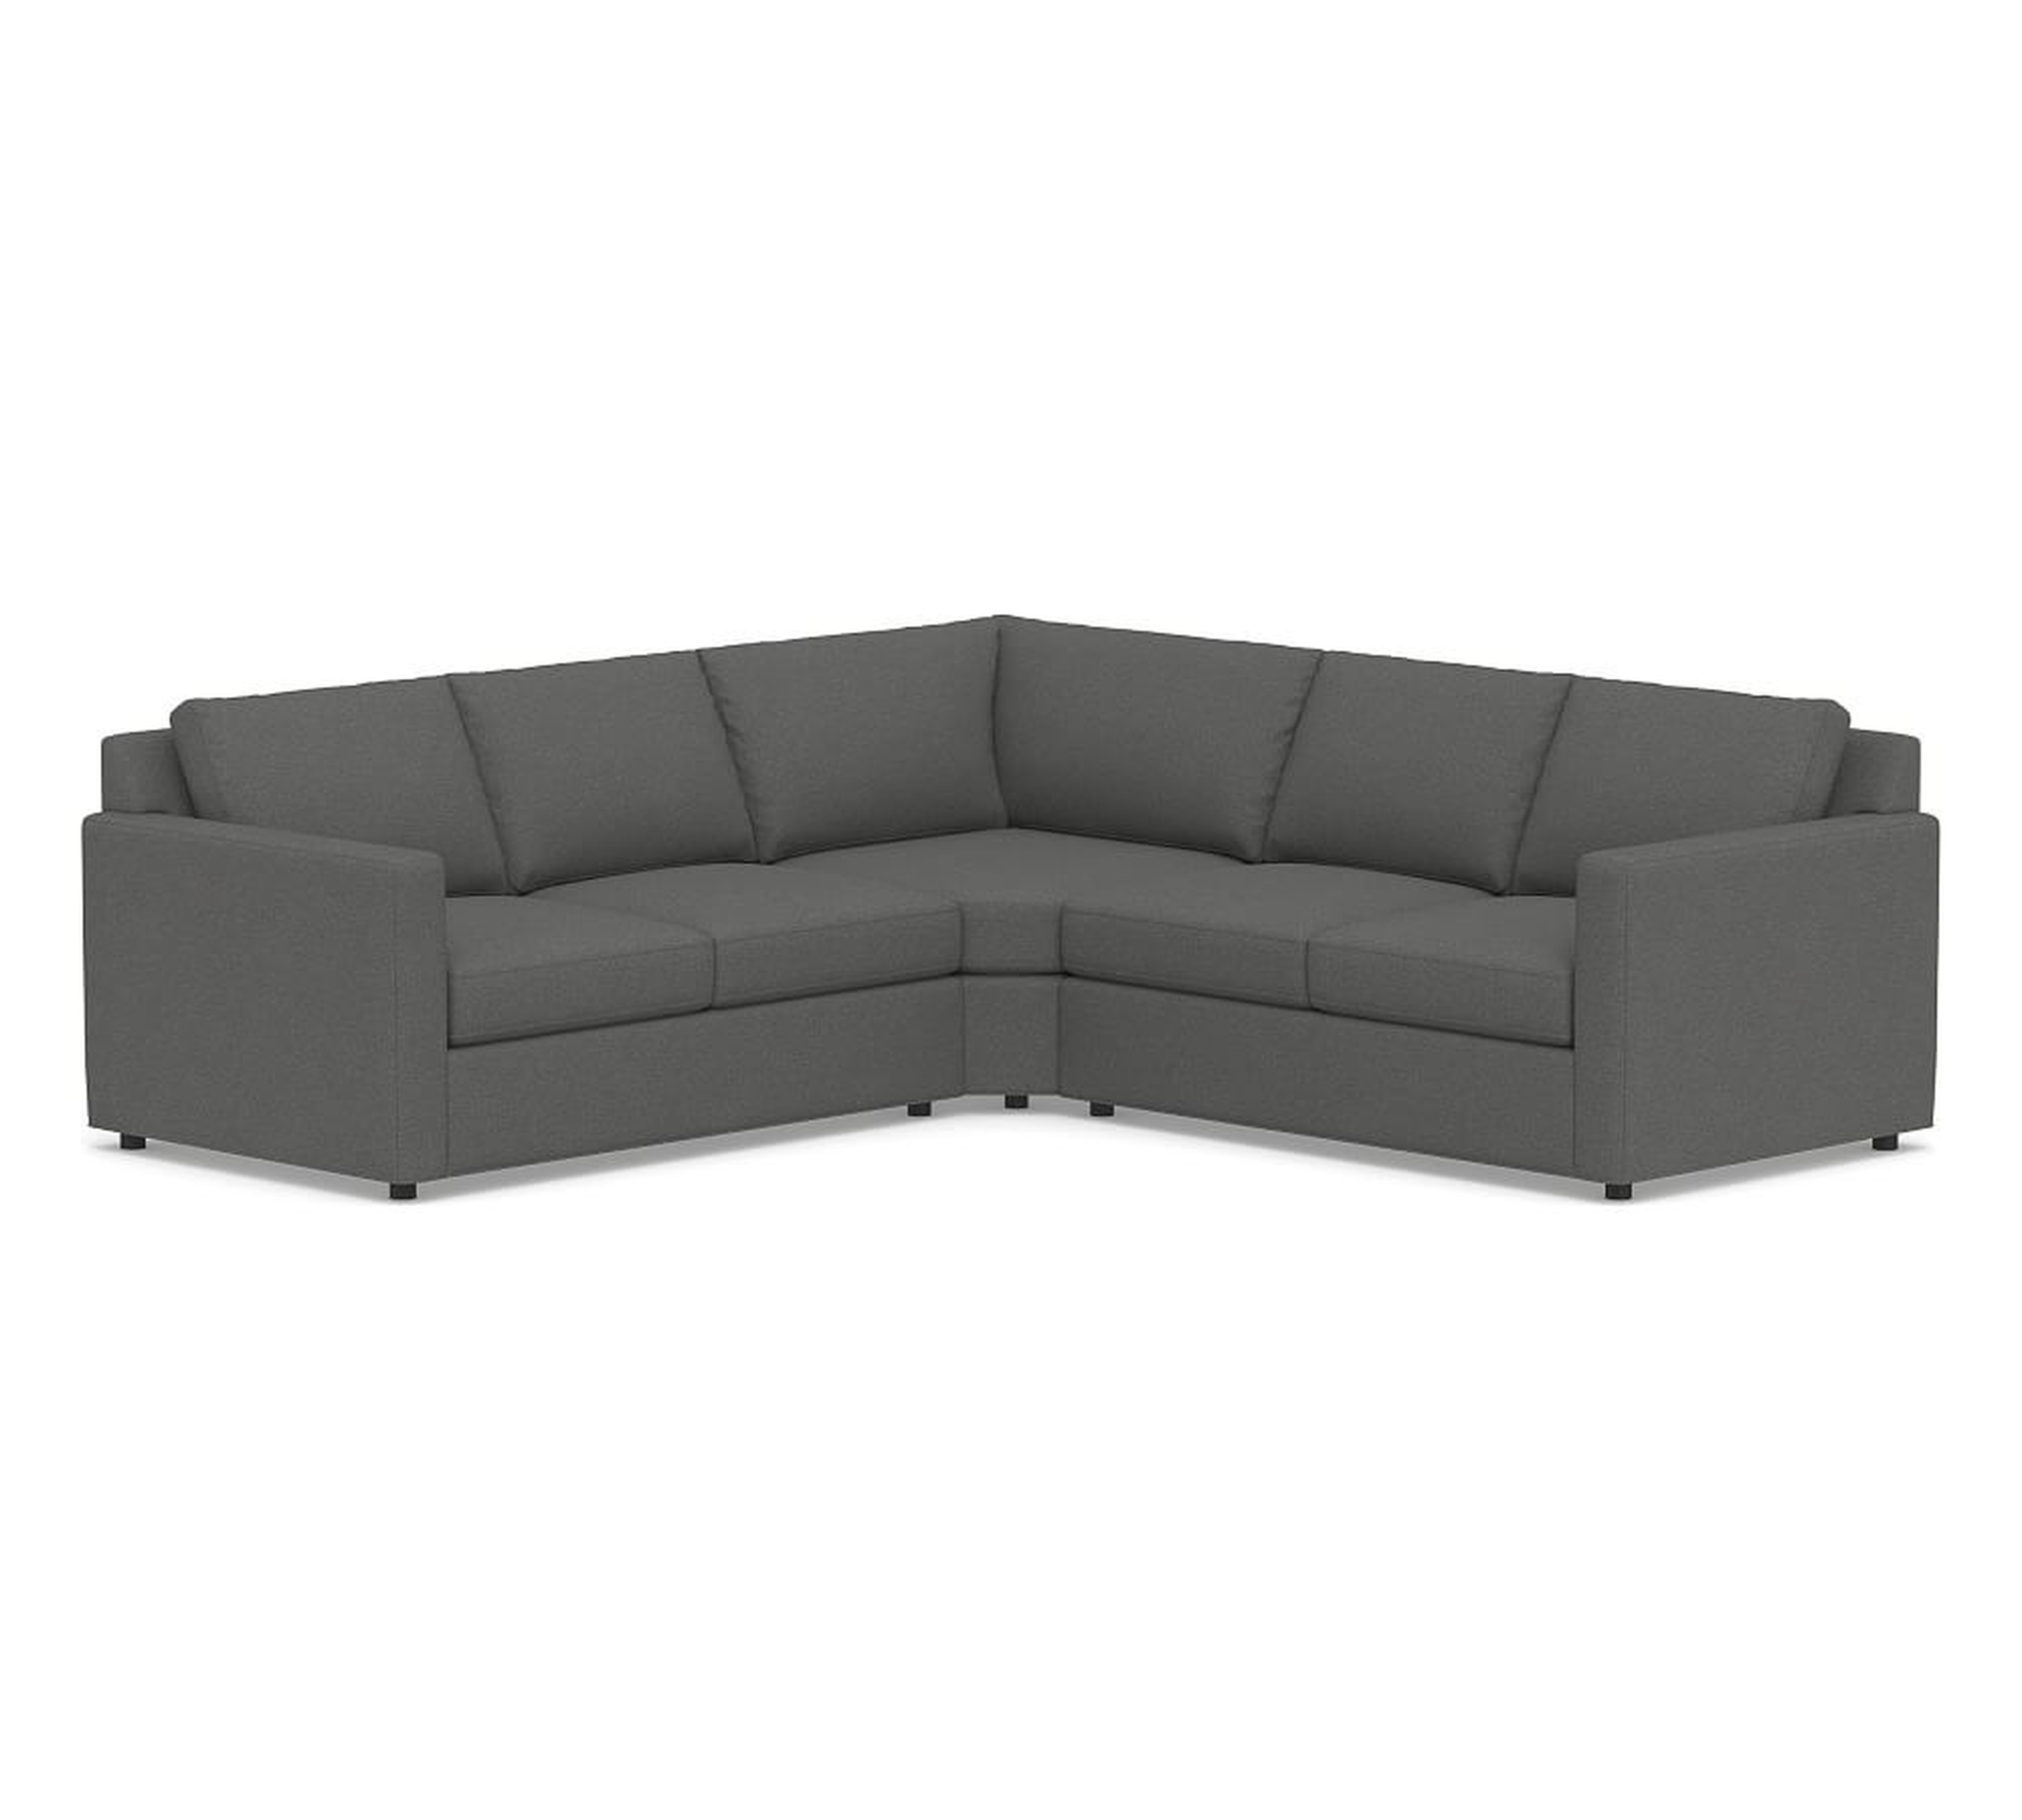 Sanford Square Arm Upholstered 3-Piece L-Shaped Wedge Sectional, Polyester Wrapped Cushions, Park Weave Charcoal - Pottery Barn